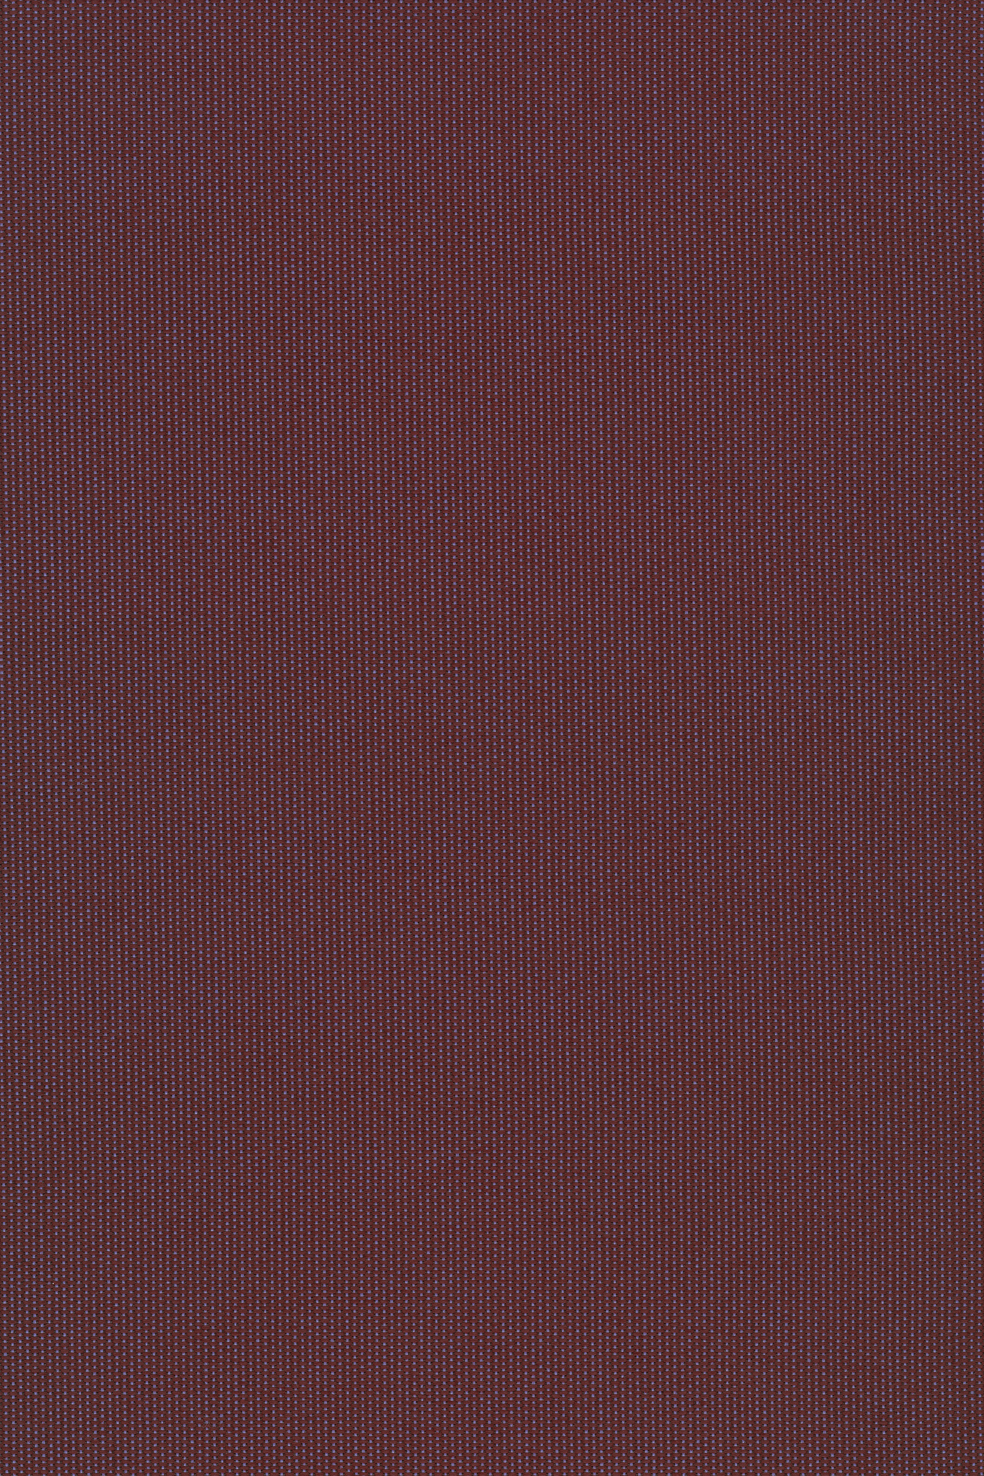 Fabric sample Patio Outdoor 570 red